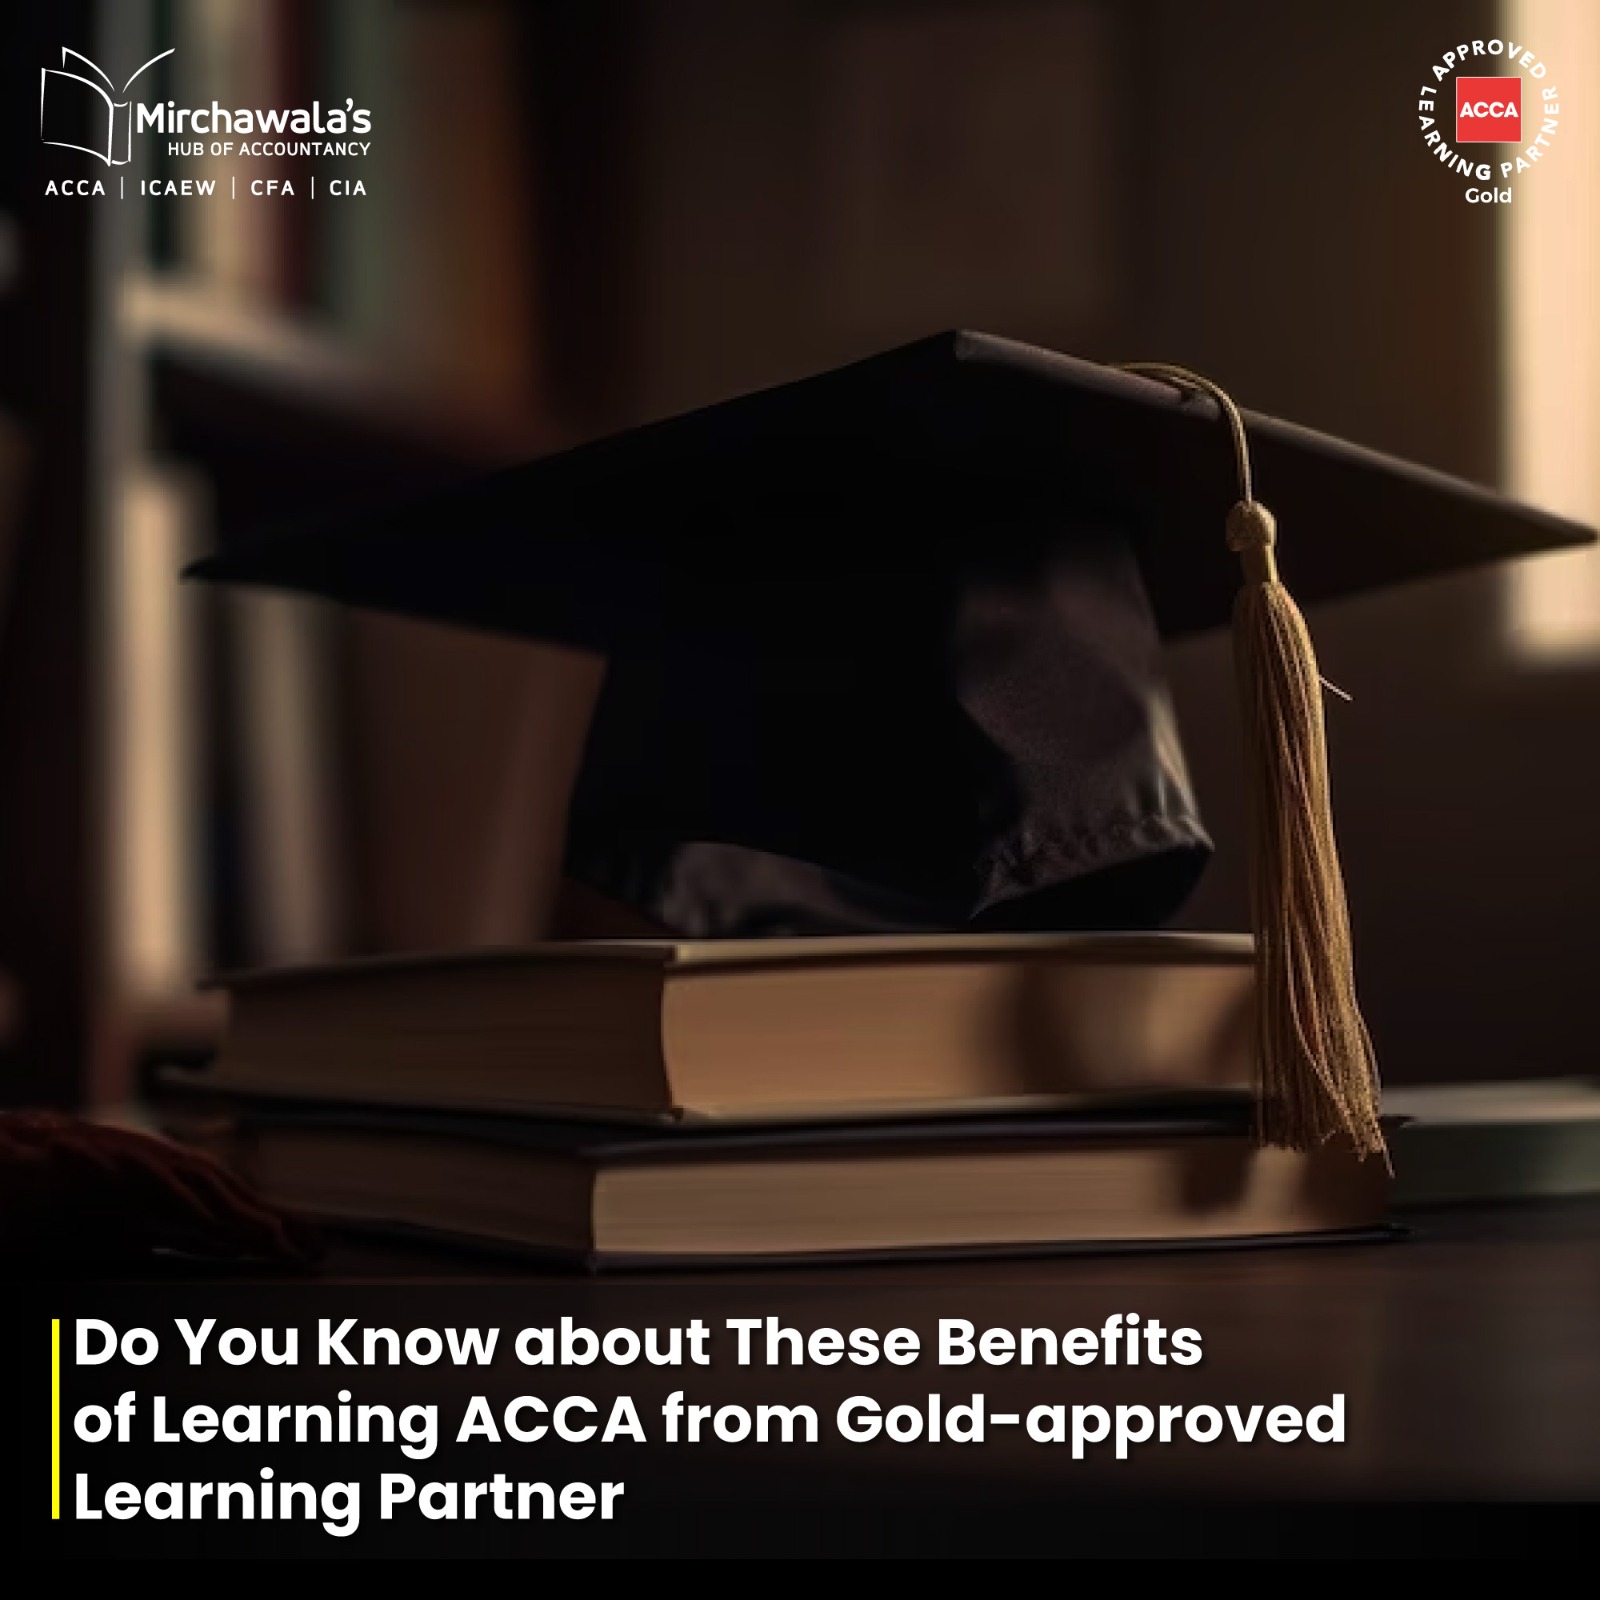 What are the Benefits of Learning ACCA from a Gold-Approved Learning Partner?